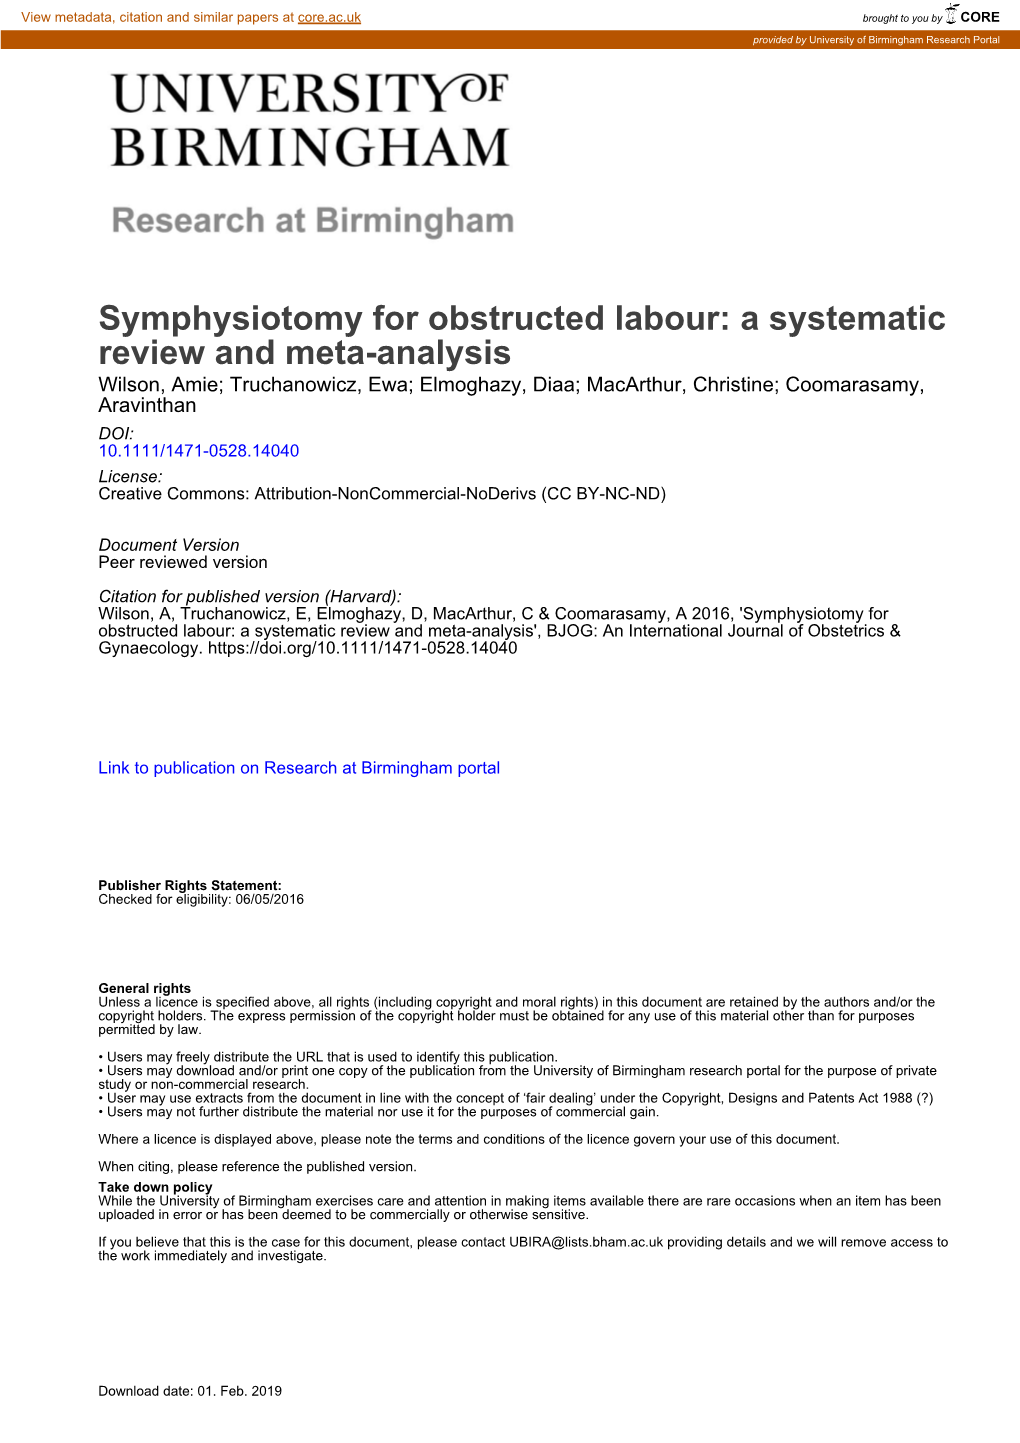 Symphysiotomy for Obstructed Labour